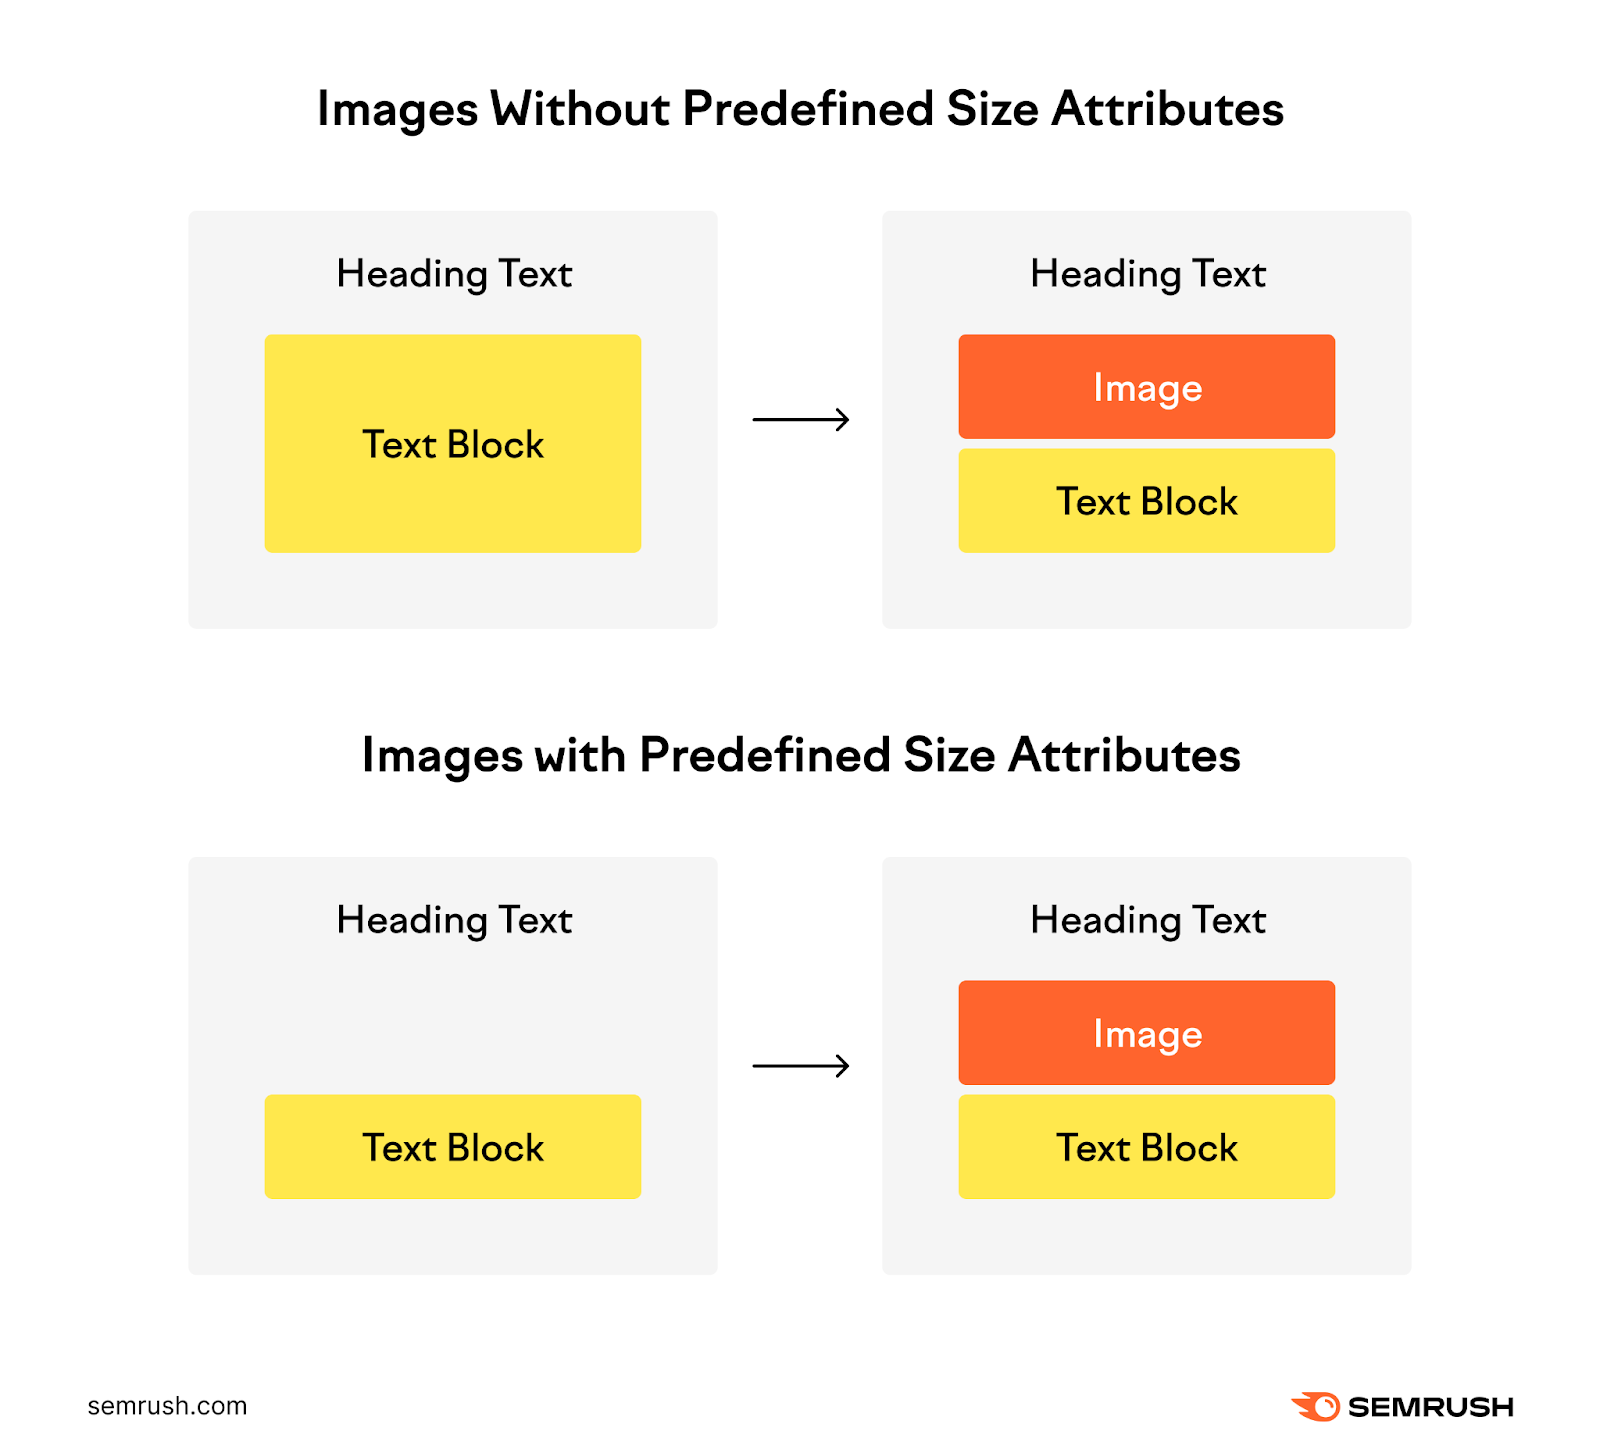 A visual showing images without predefined size attributes and images with predefined size attributes